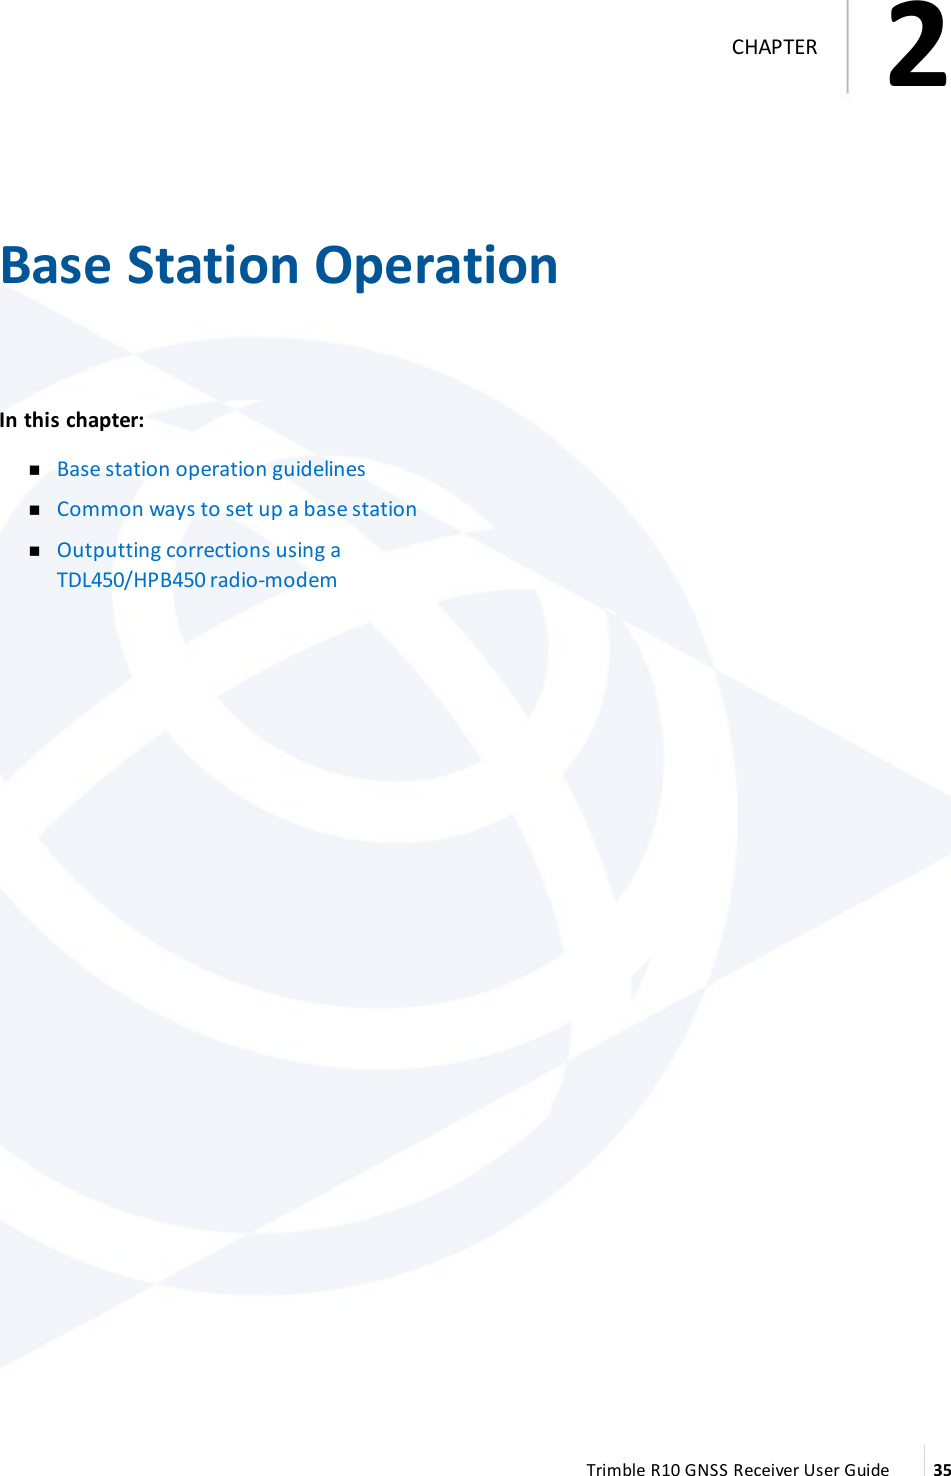 2   Base Station OperationIn this chapter:   nBase station operation guidelines nCommon ways to set up a base station nOutputting corrections using a TDL450/HPB450 radio-modem Trimble R10 GNSS Receiver User Guide 352CHAPTER